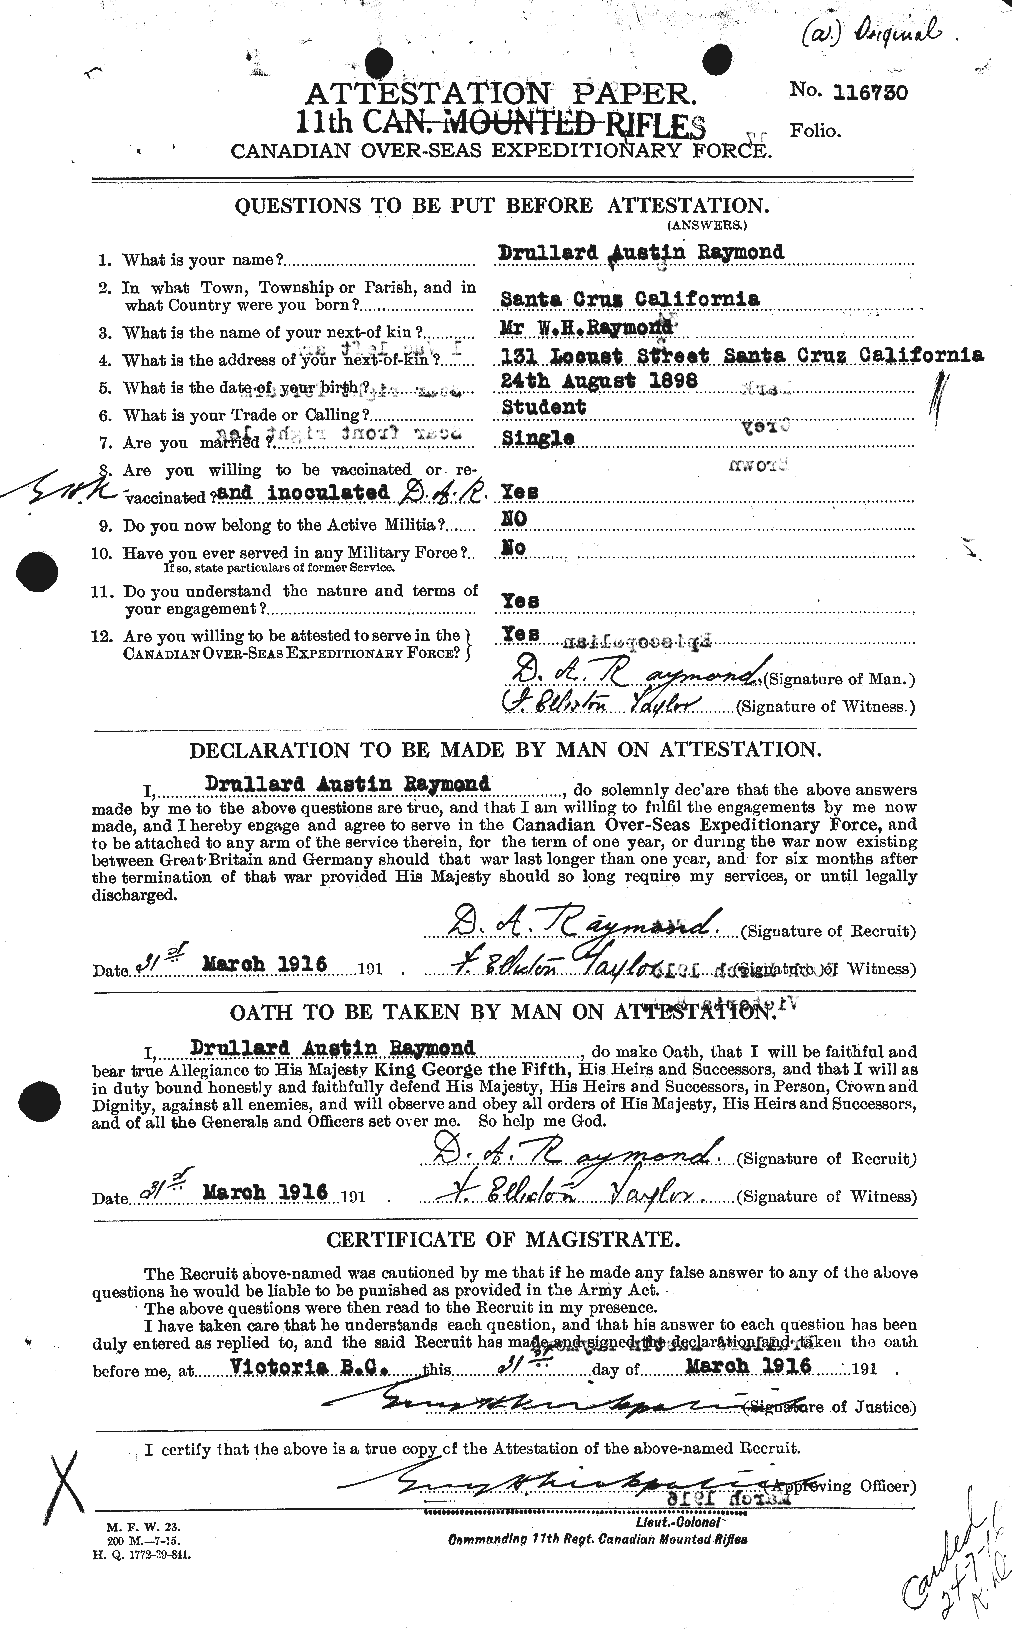 Personnel Records of the First World War - CEF 595302a